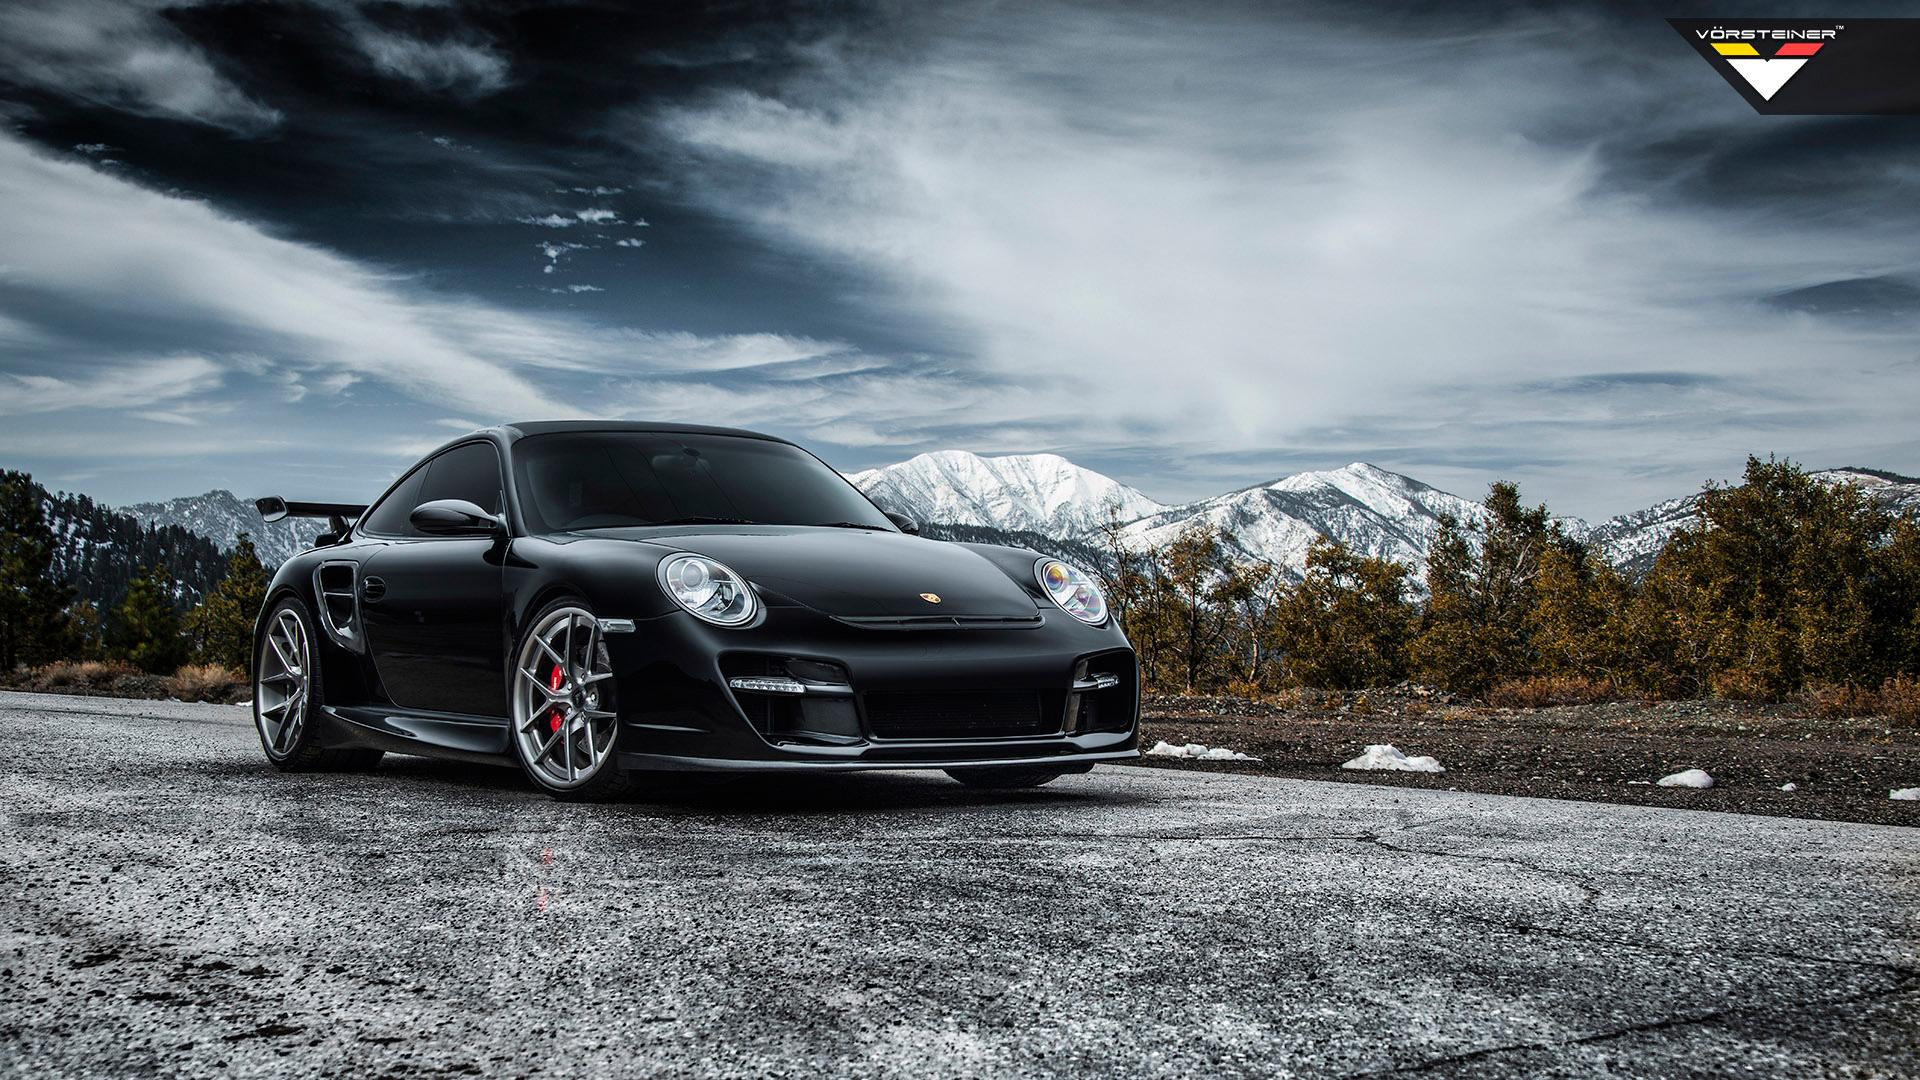 911 Turbo Wallpapers Top Free 911 Turbo Backgrounds Wallpaperaccess